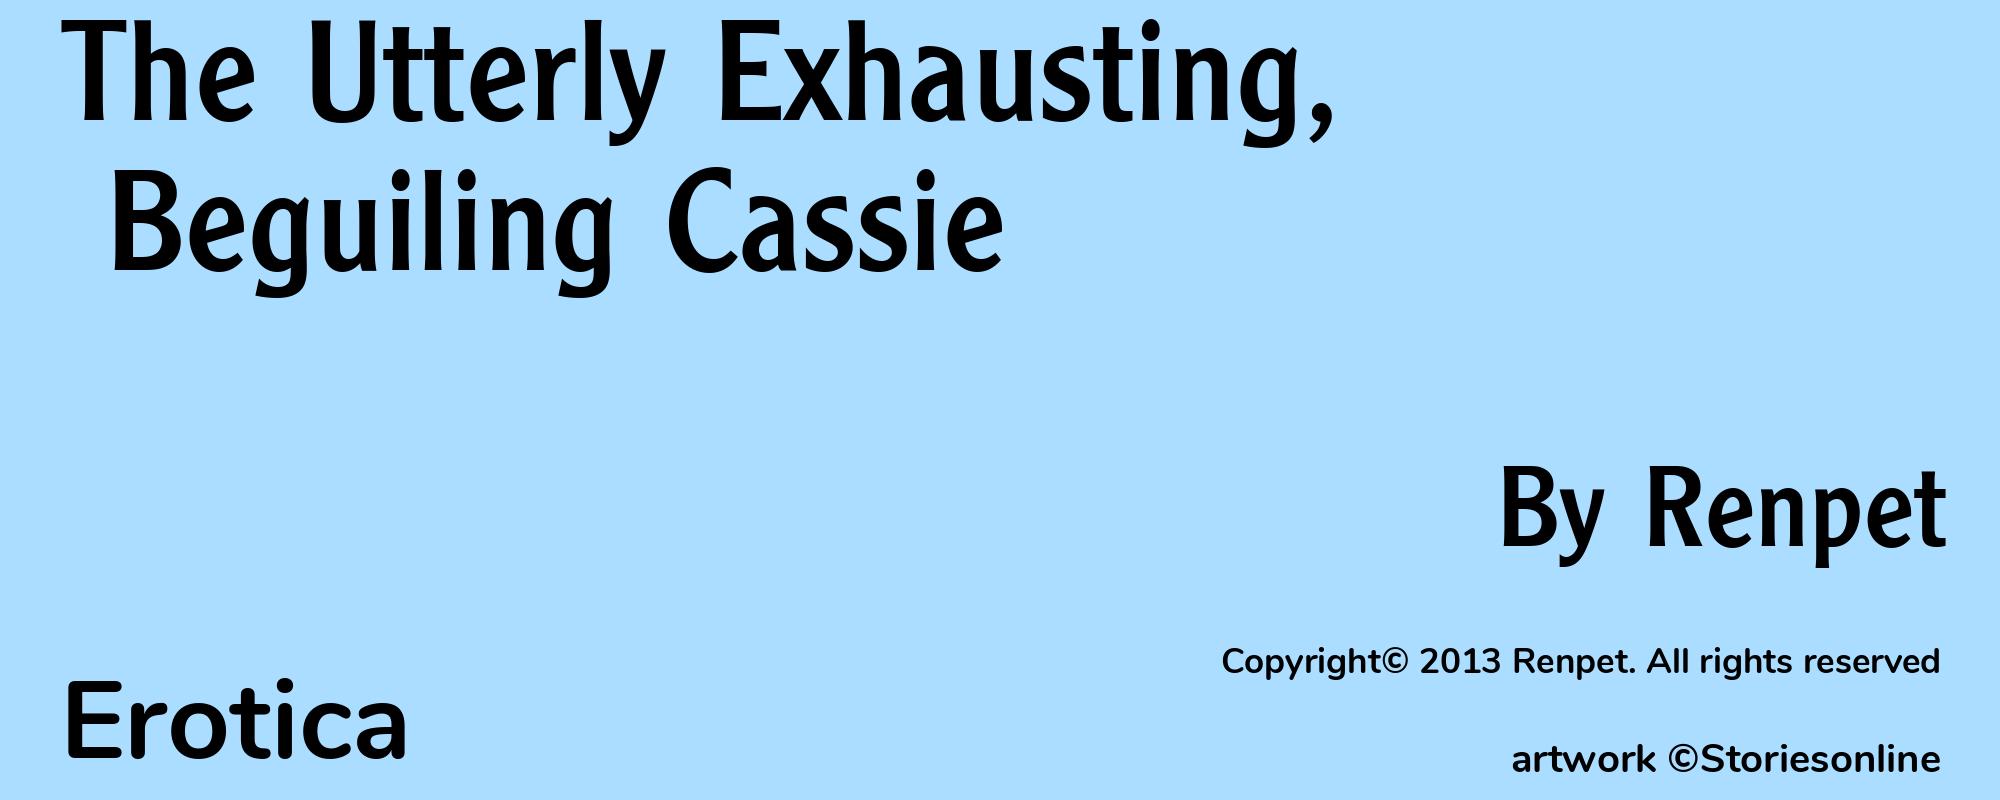 The Utterly Exhausting, Beguiling Cassie - Cover